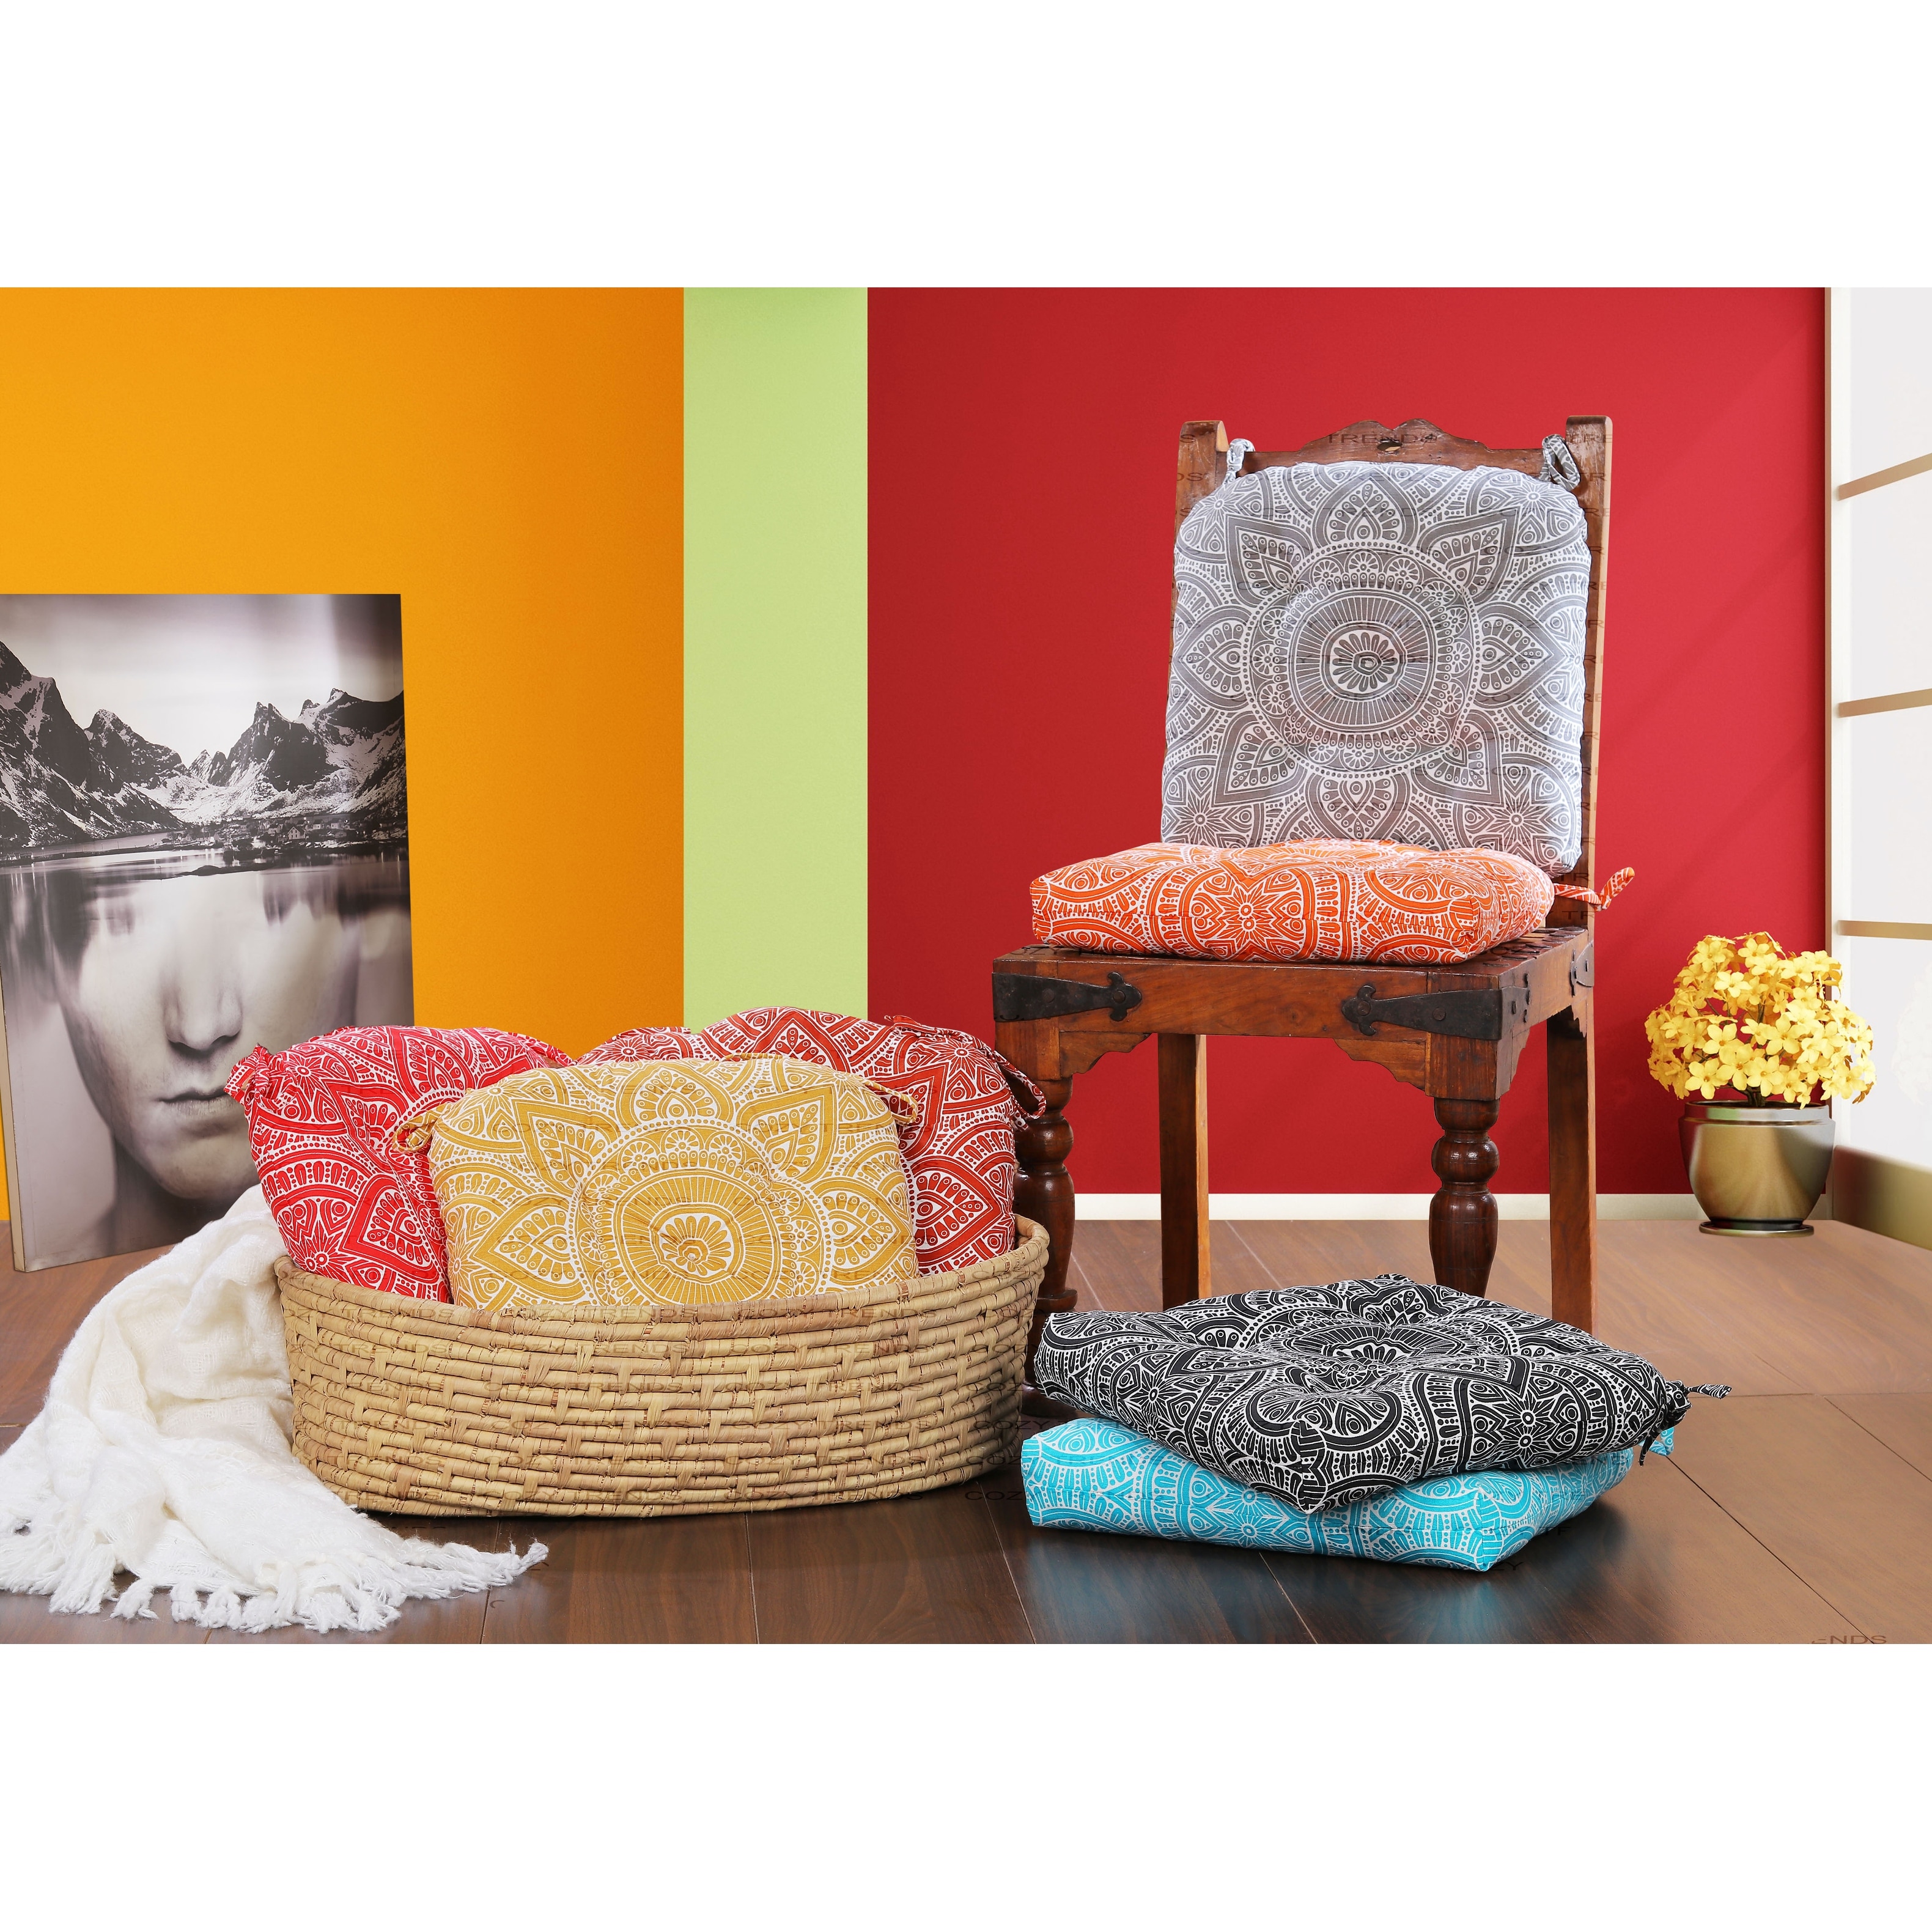 https://ak1.ostkcdn.com/images/products/is/images/direct/455b7c266cab67d984692d73ee24387baf90ac3c/Handmade-Cotton-Chair-cushion-19%27%27x9%27%27-Chair-Pads-with-Ties-for-chairs-armchairs-Dining-chair-pads-cushions-%7C-SET-OF-2.jpg